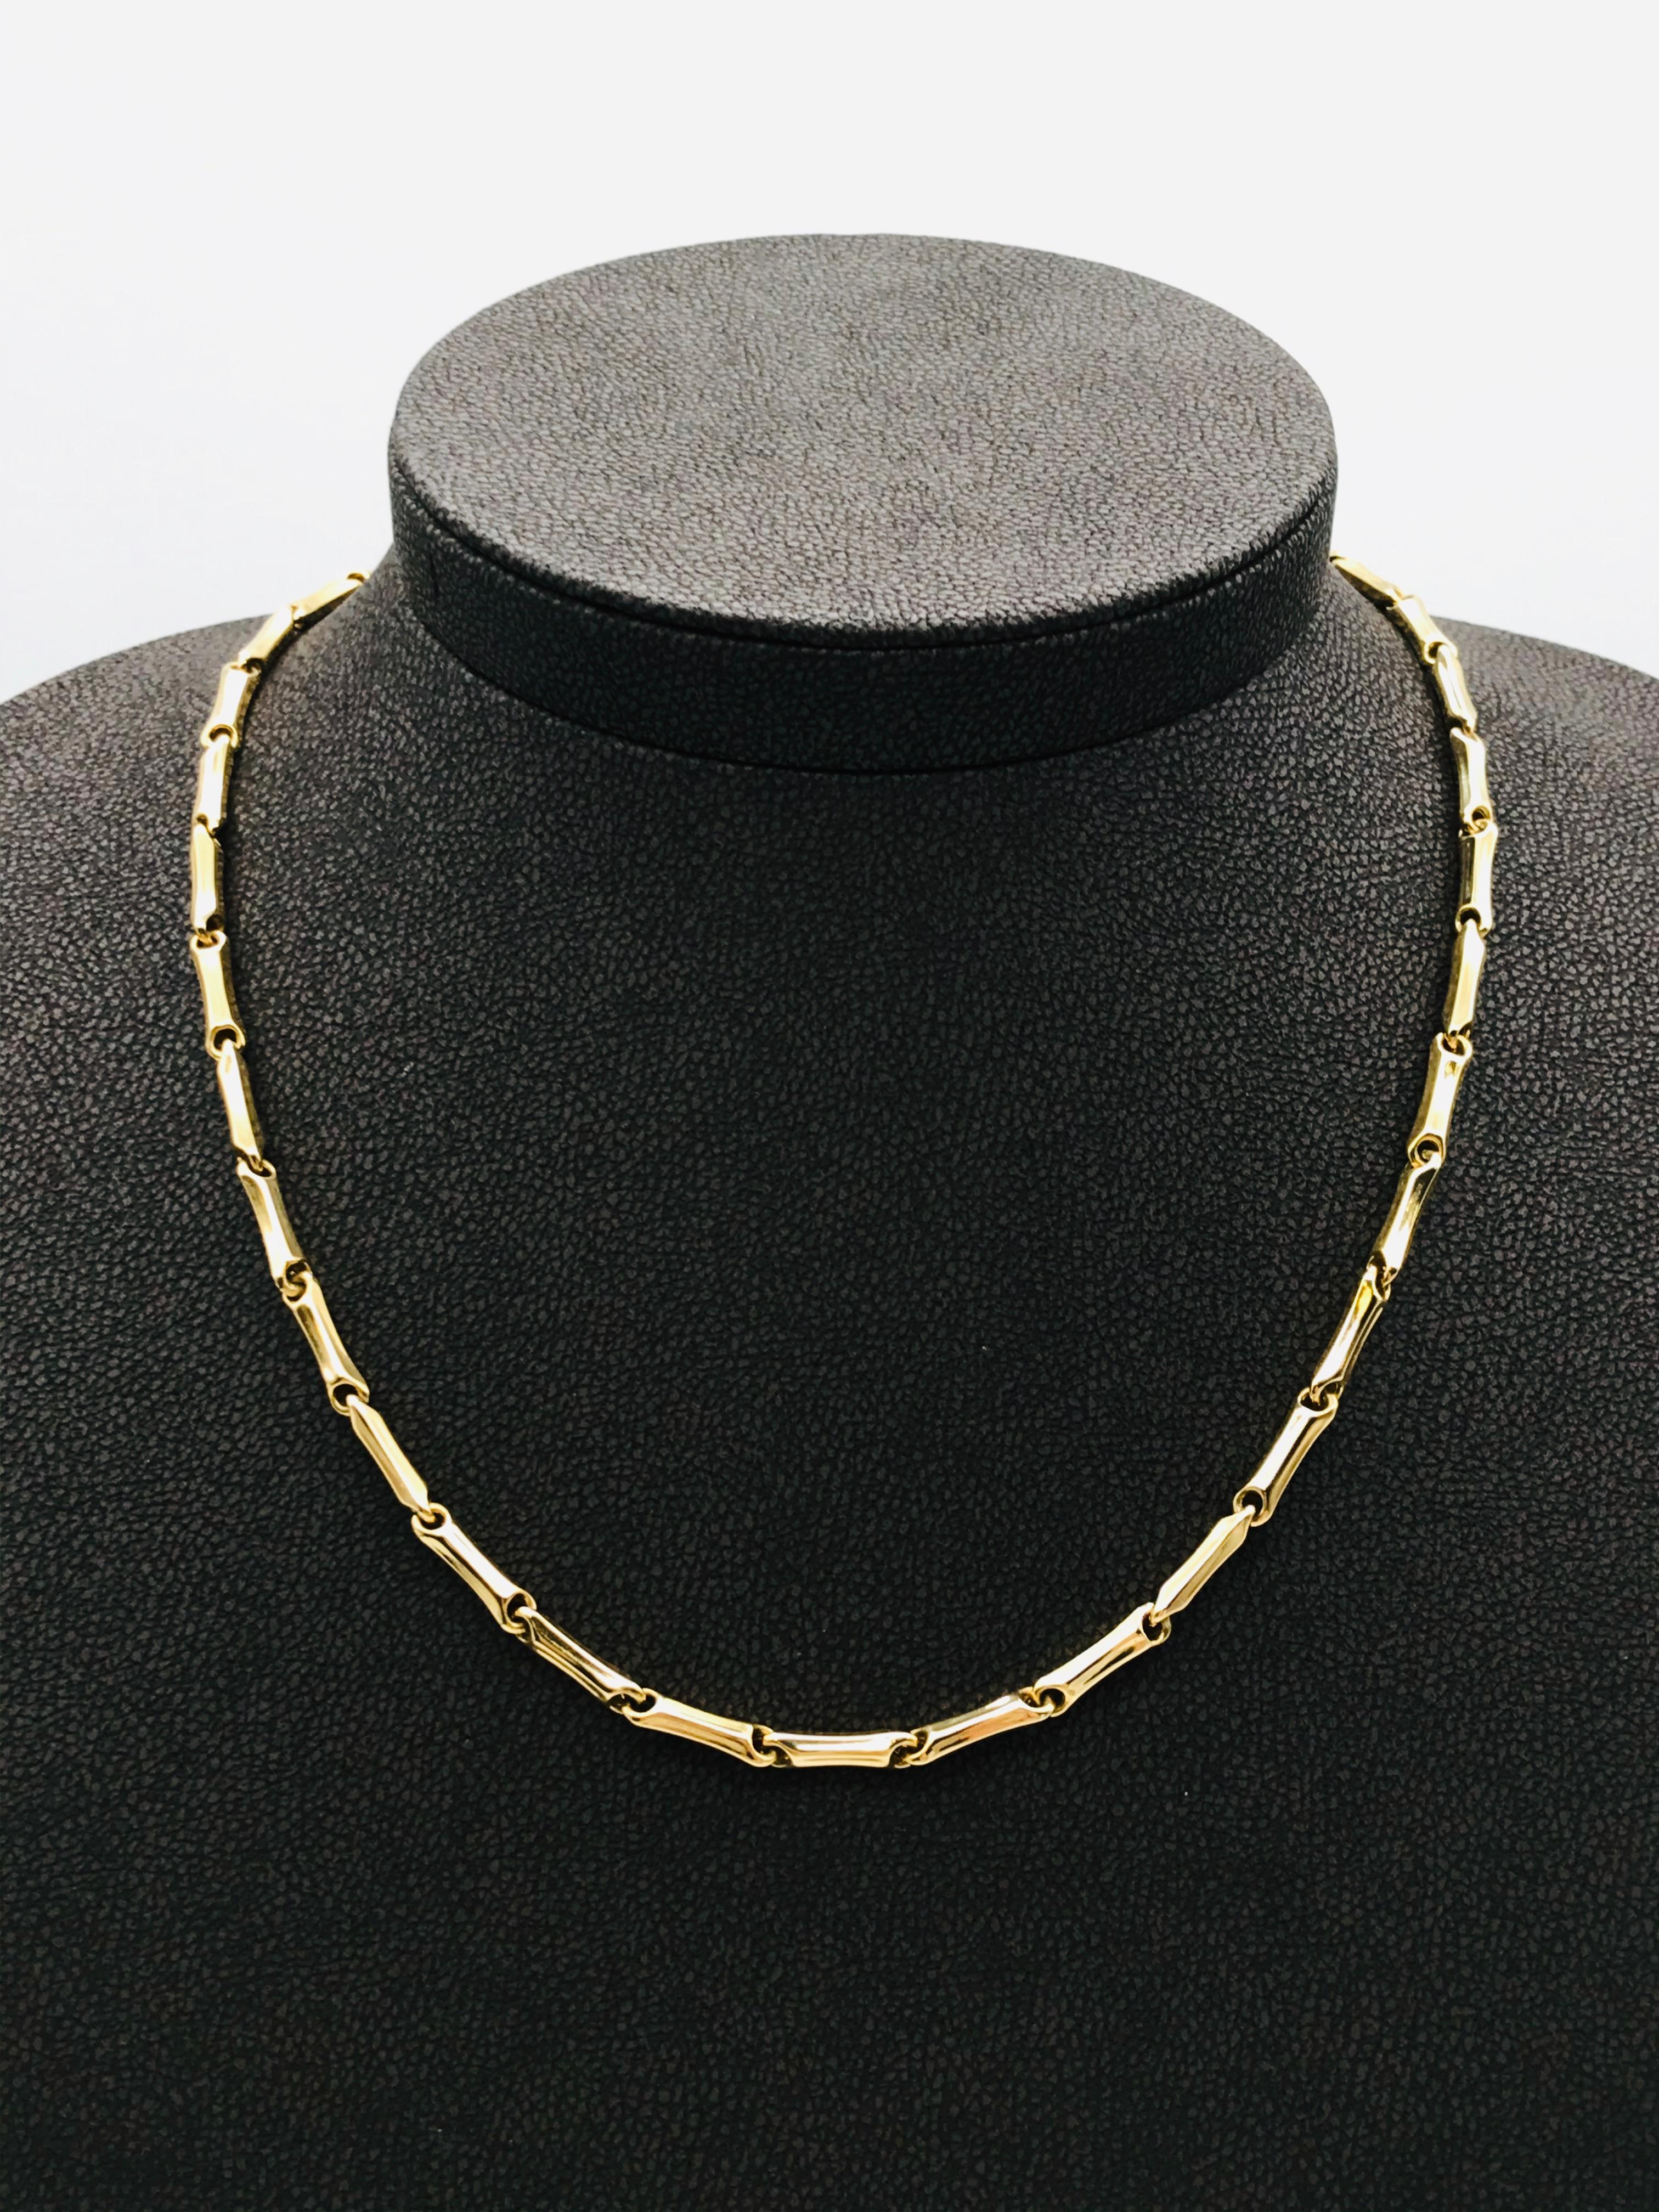 Yellow Gold 18k Link Necklace
Length 50 cm 
Weigth of Gold 10.3 grams
